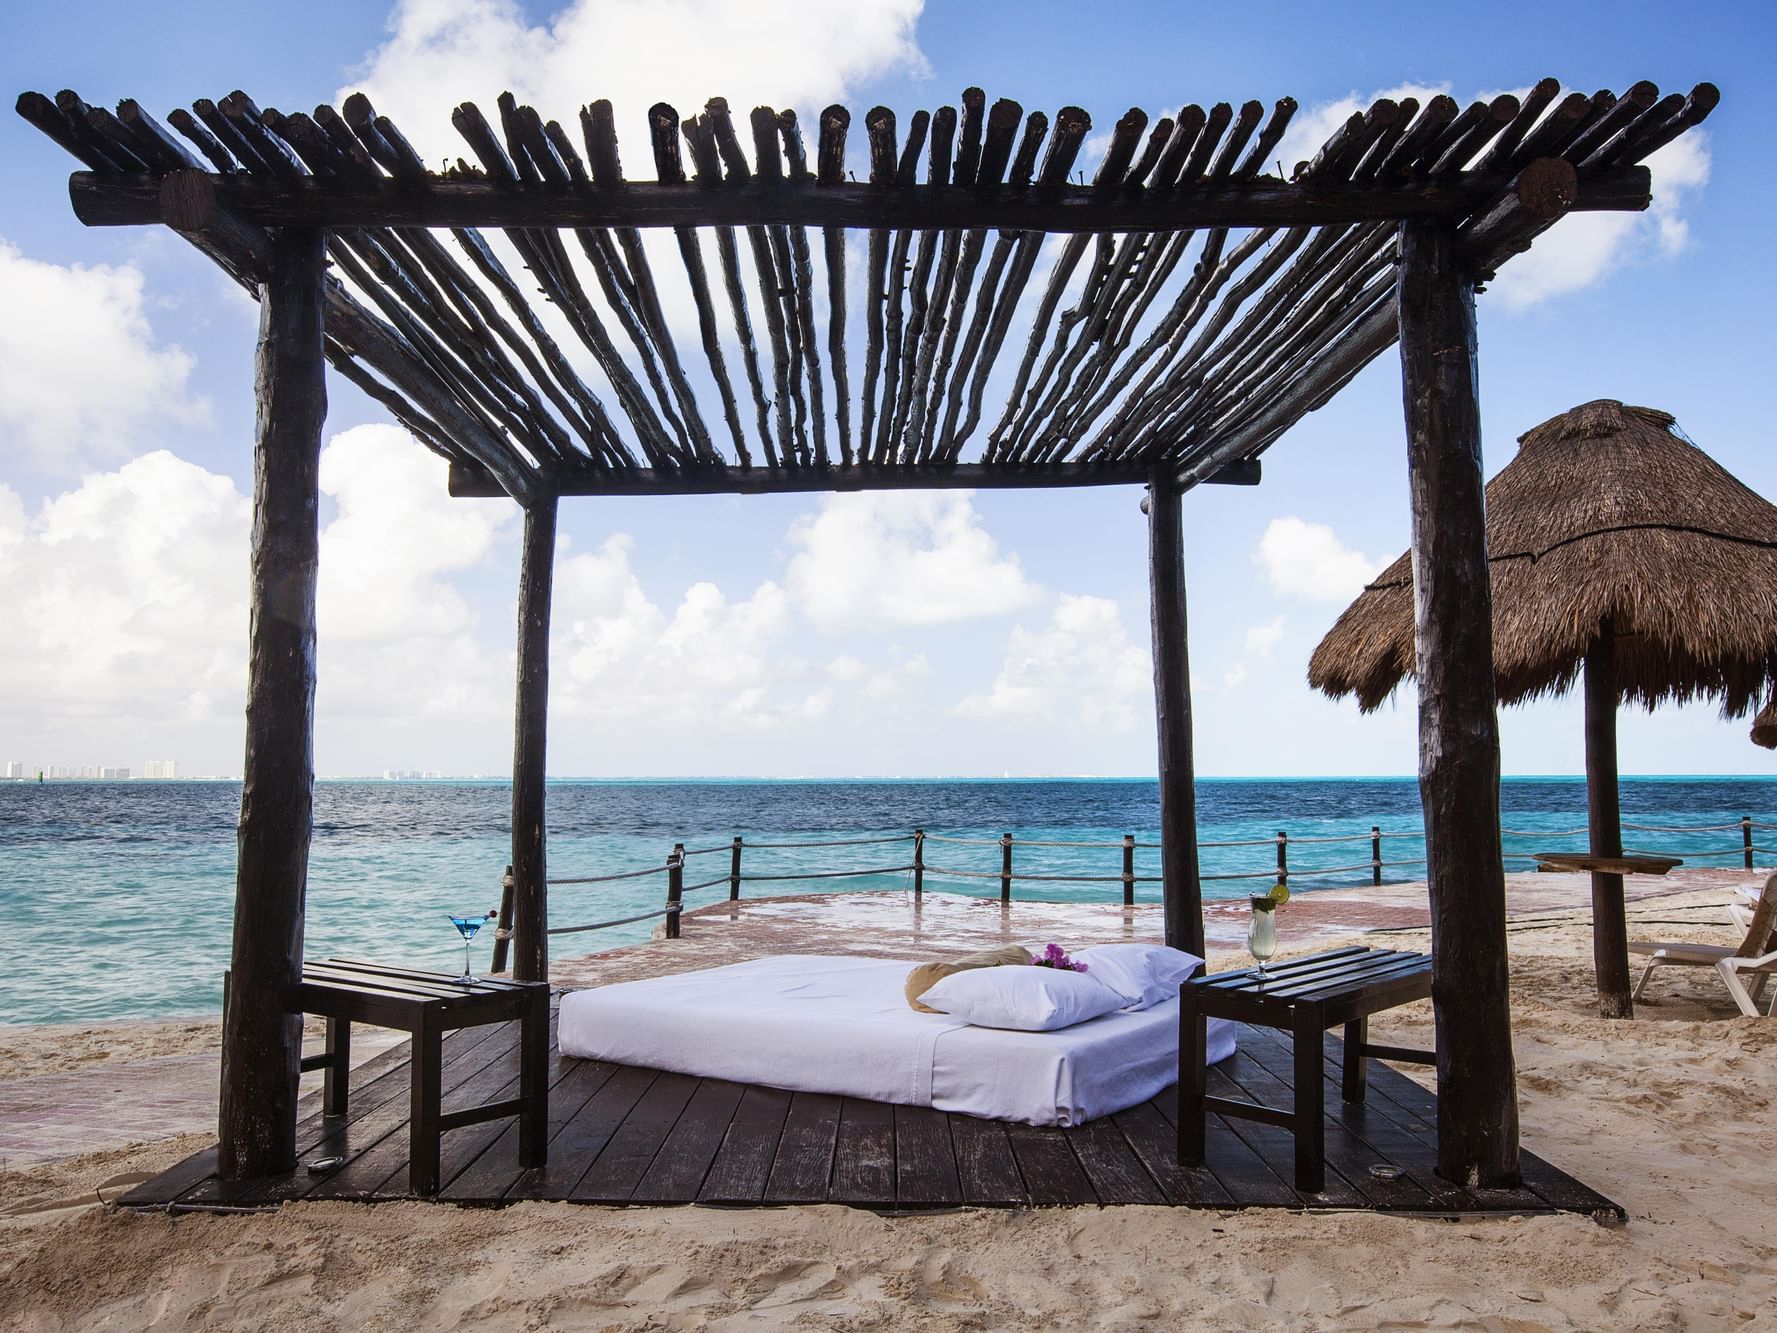 Lounge bed near the ocean in Cancún city